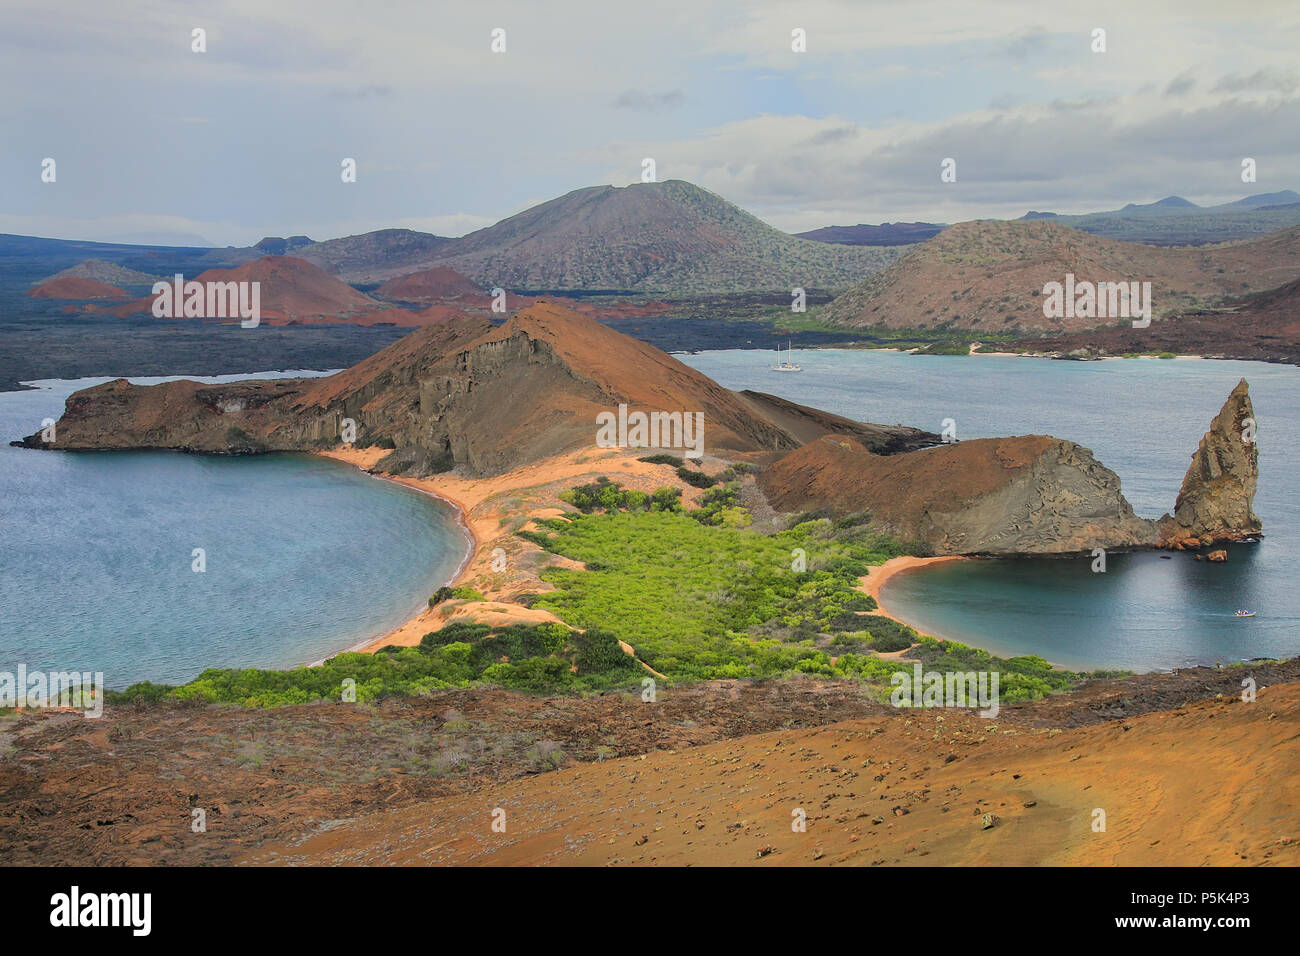 View of Pinnacle Rock on Bartolome island, Galapagos National Park, Ecuador. This island offers some of the most beautiful landscapes in the archipela Stock Photo